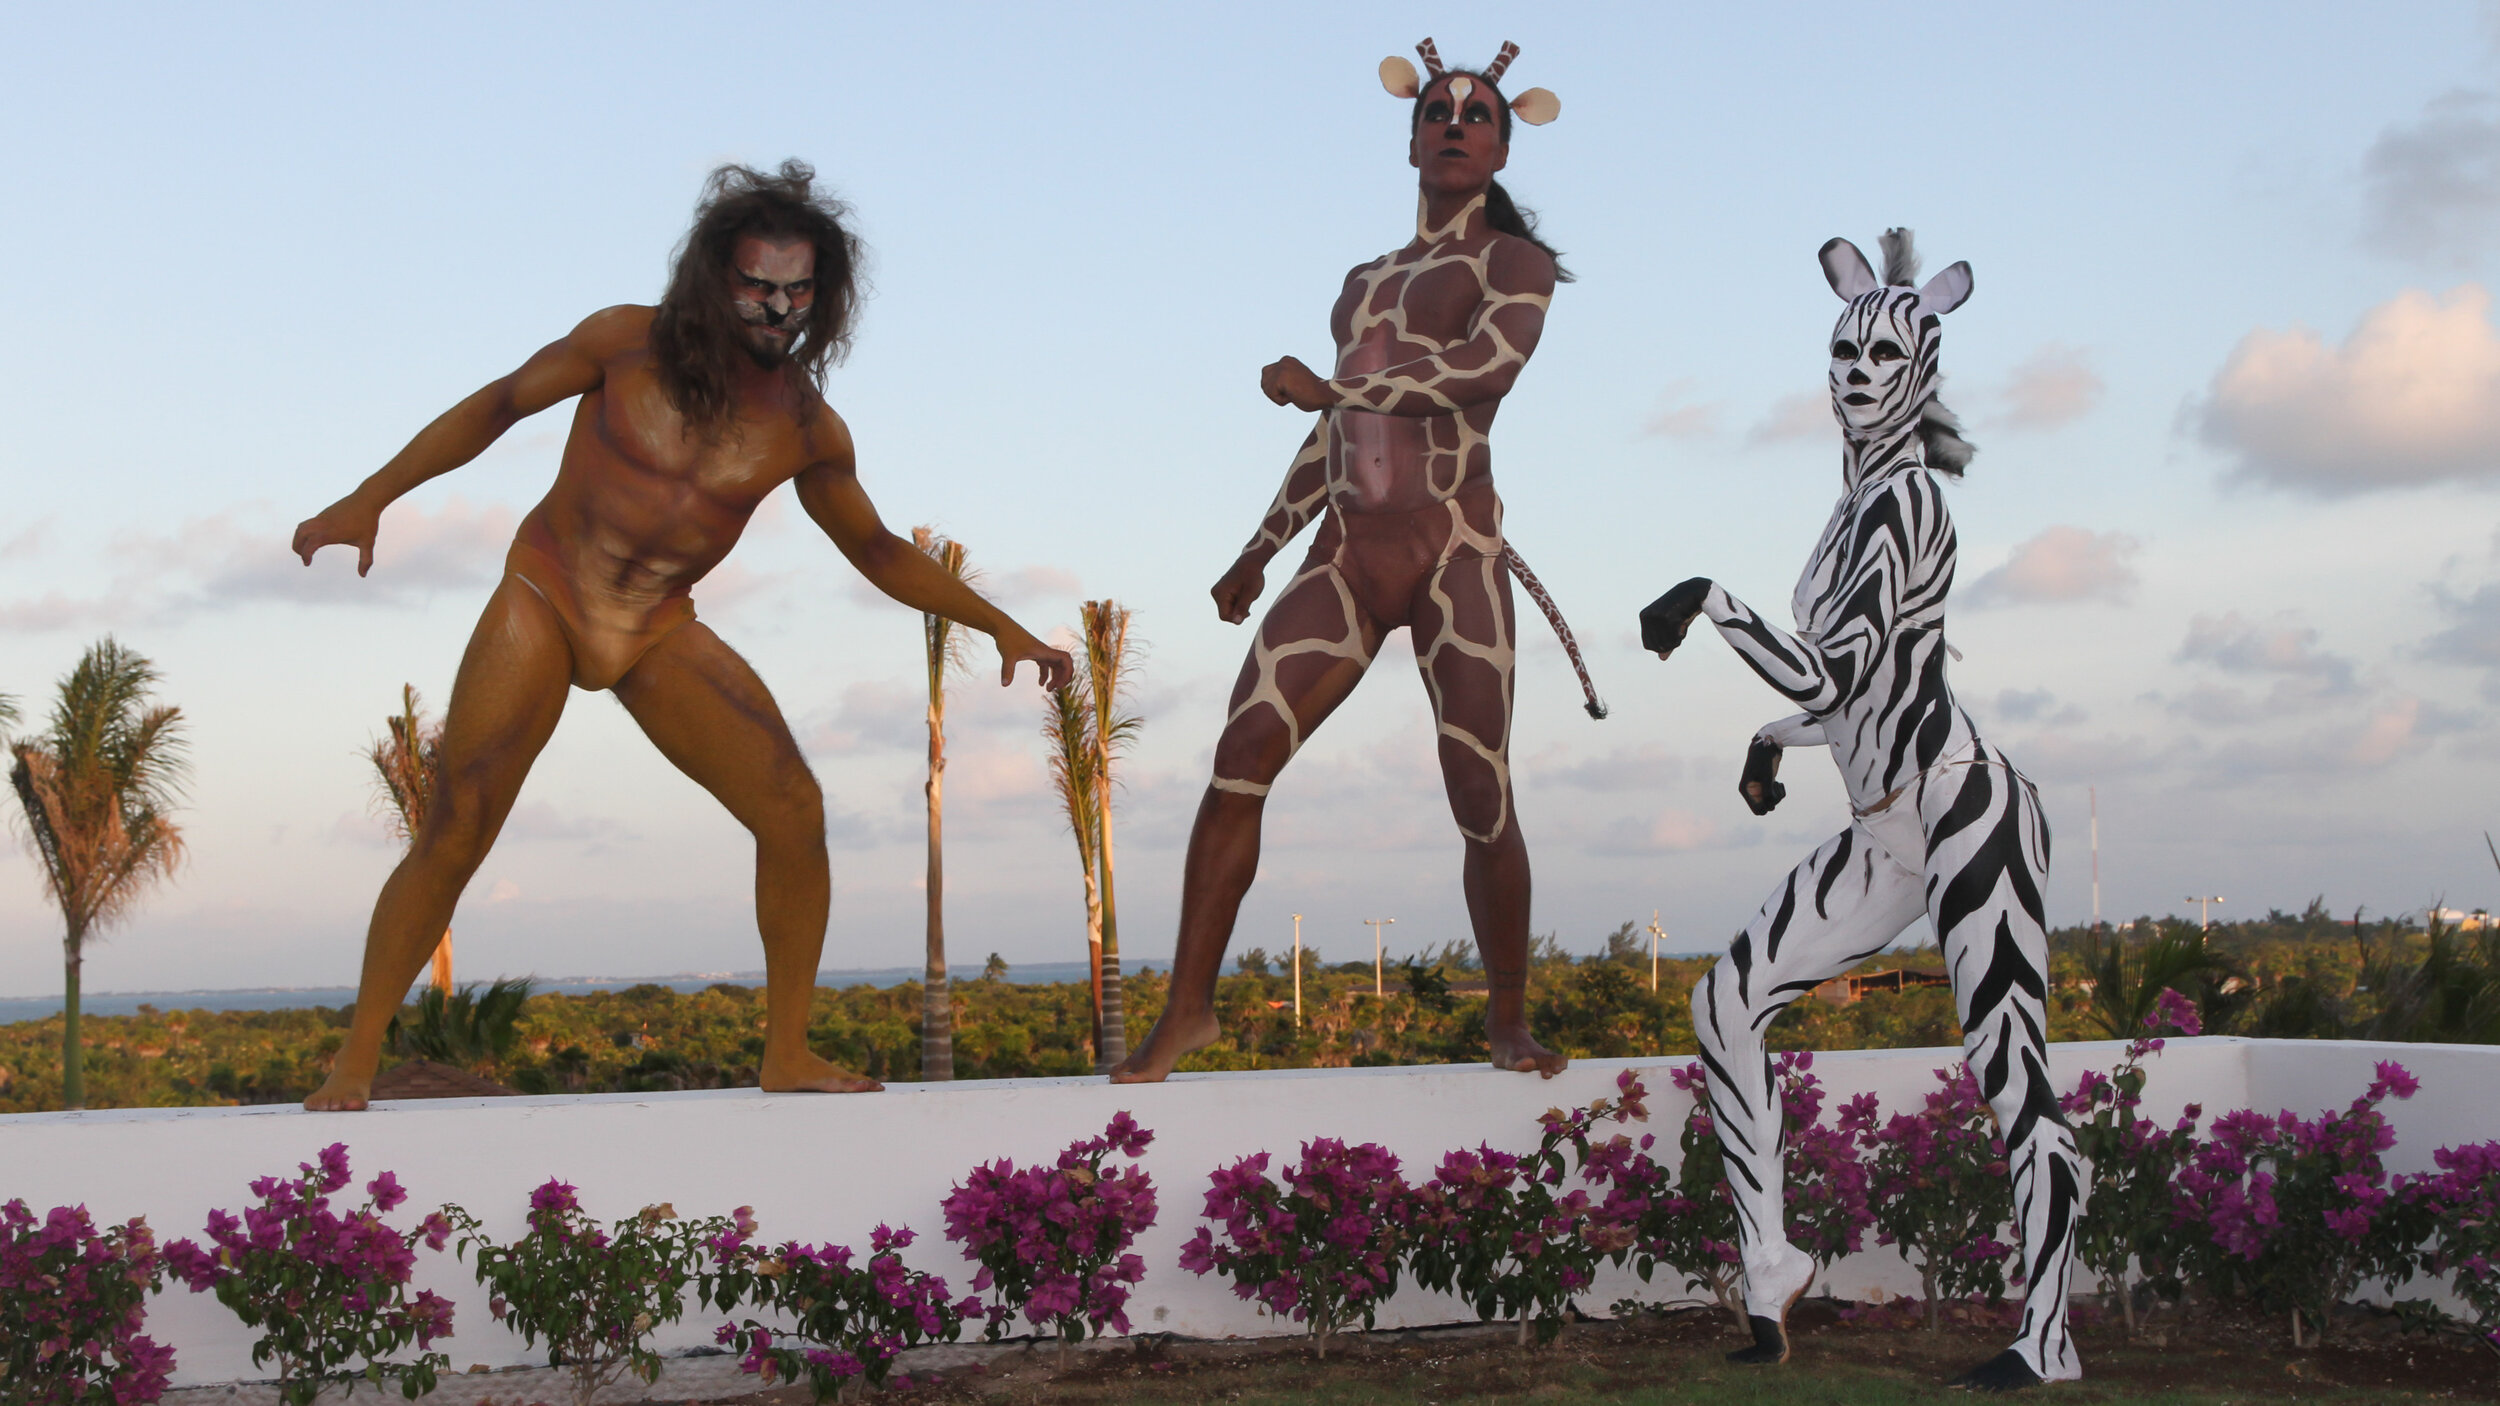 Bodypainting Animal Characters, Guest Welcome and Photo Opportunity, Cancun, Mexico